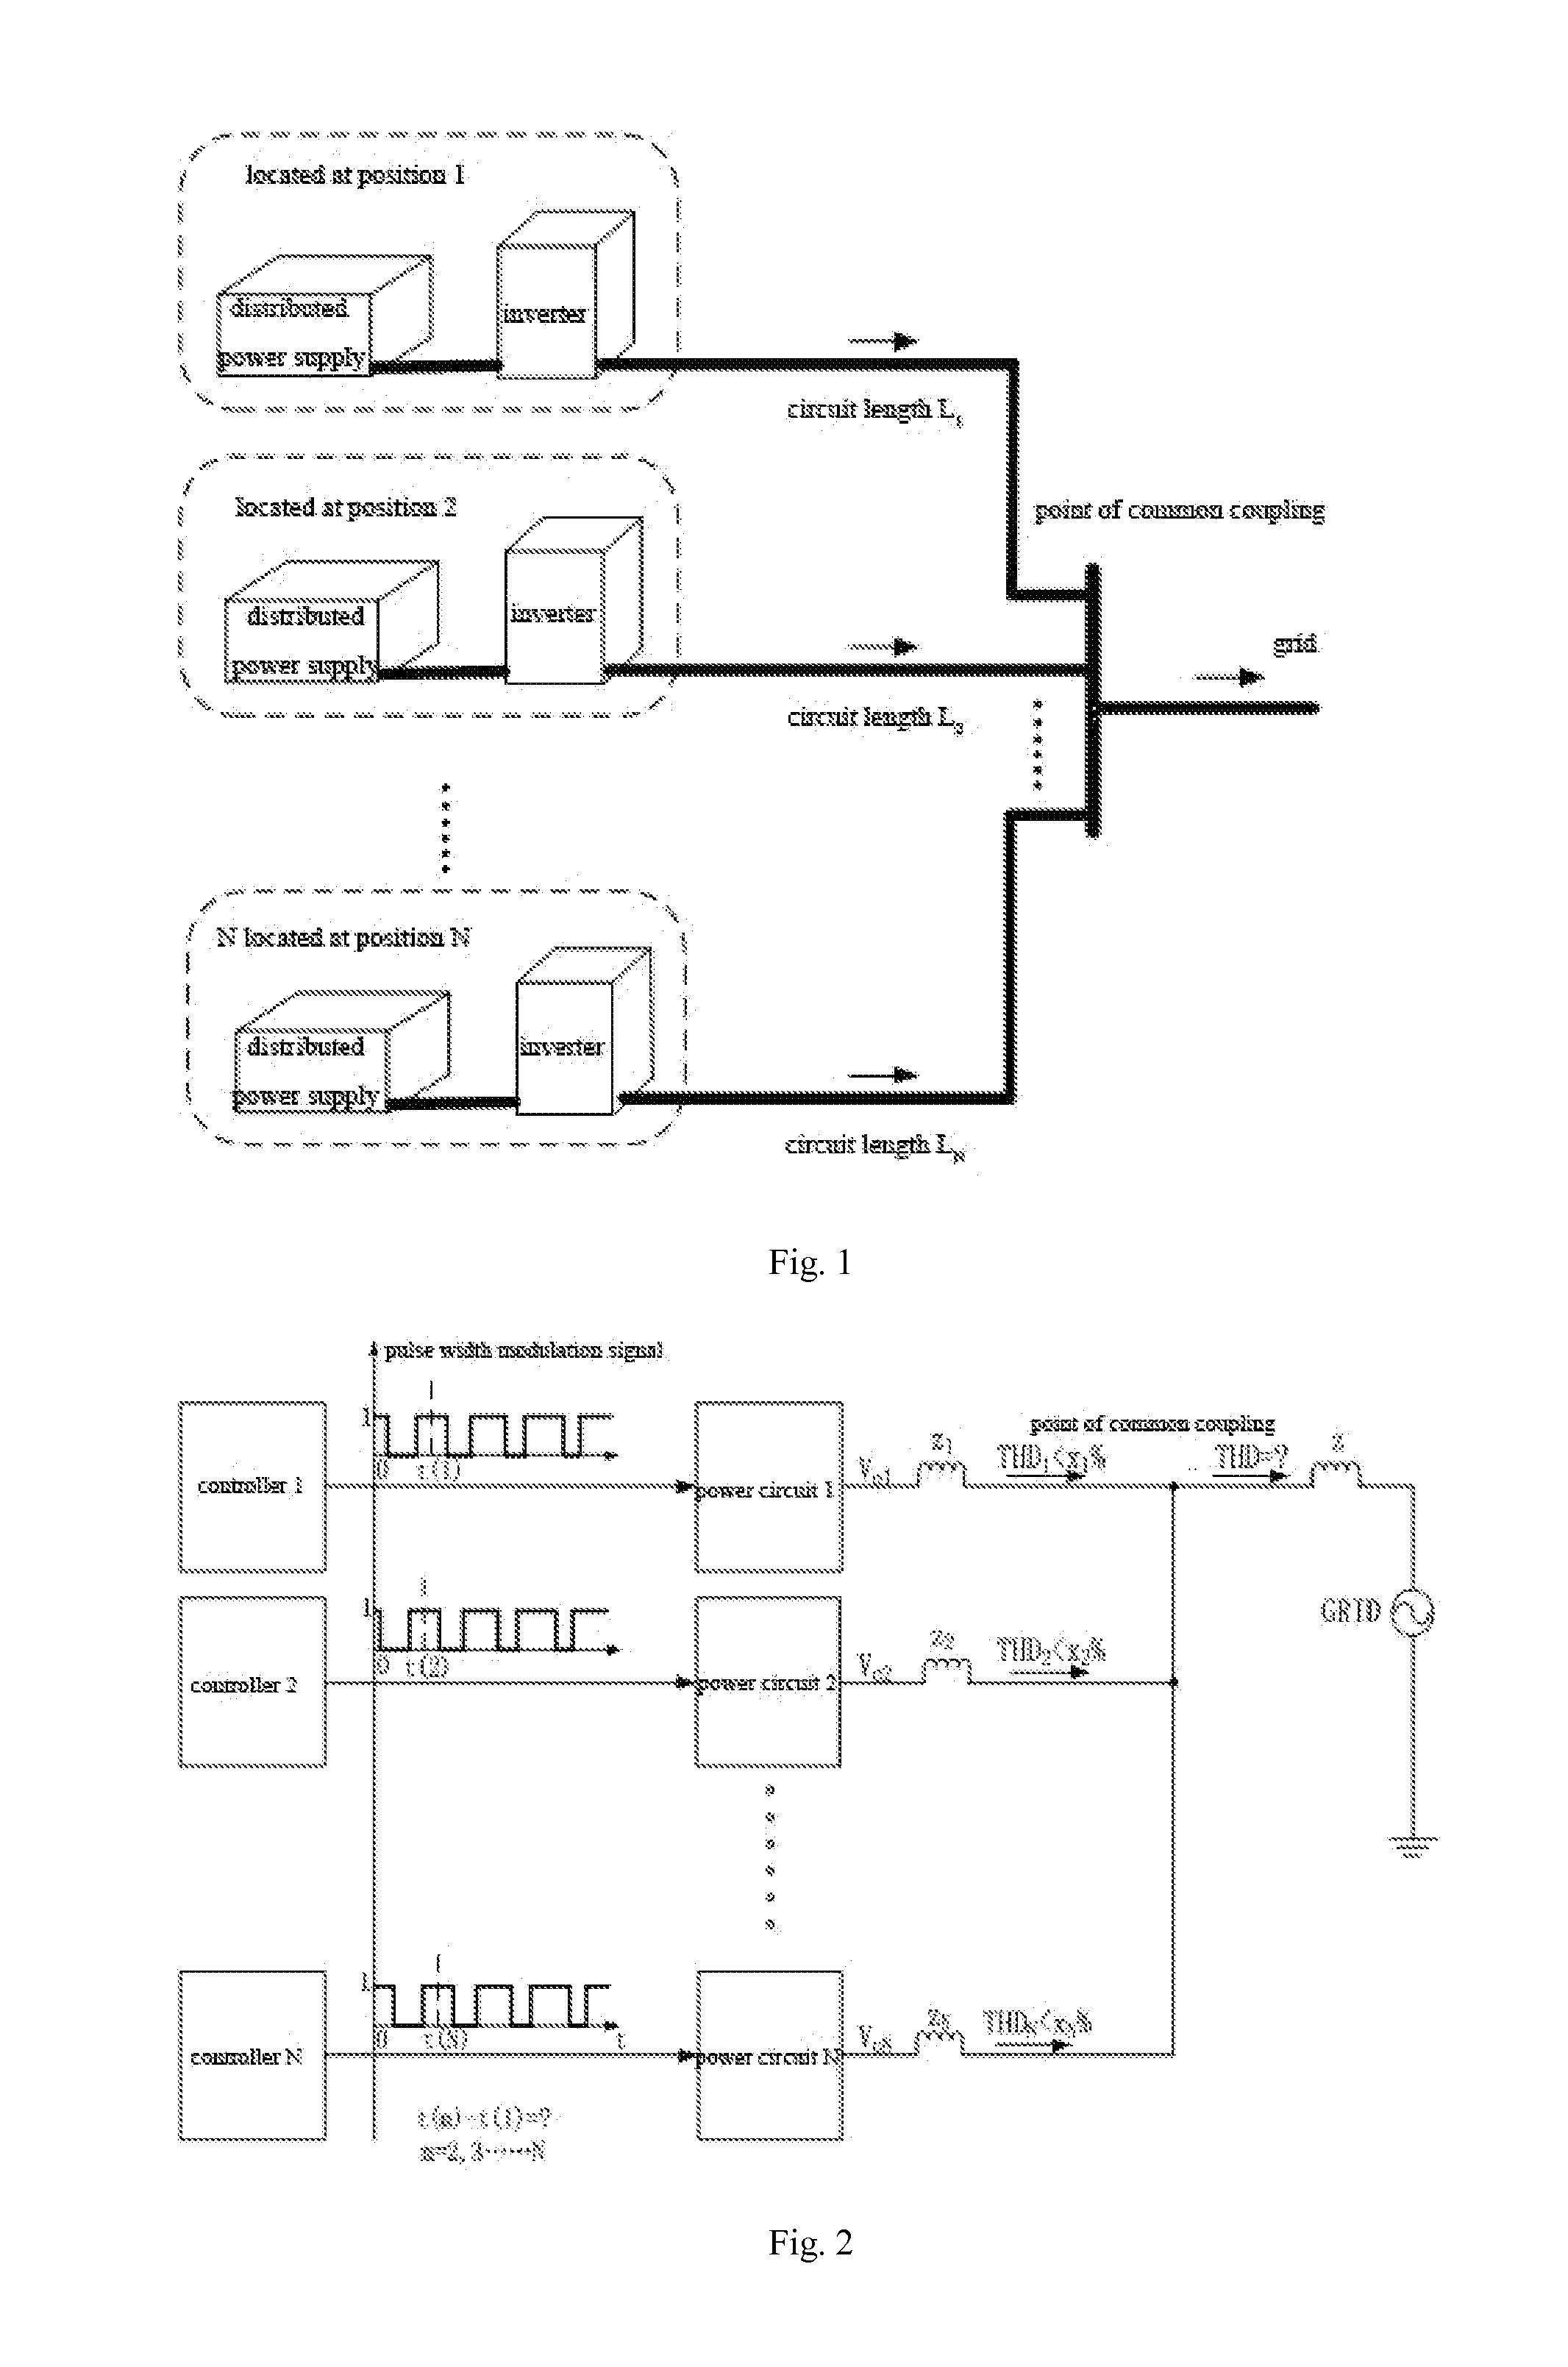 Global synchronous pulse width modulation system and method for distributed grid-connected inverter system